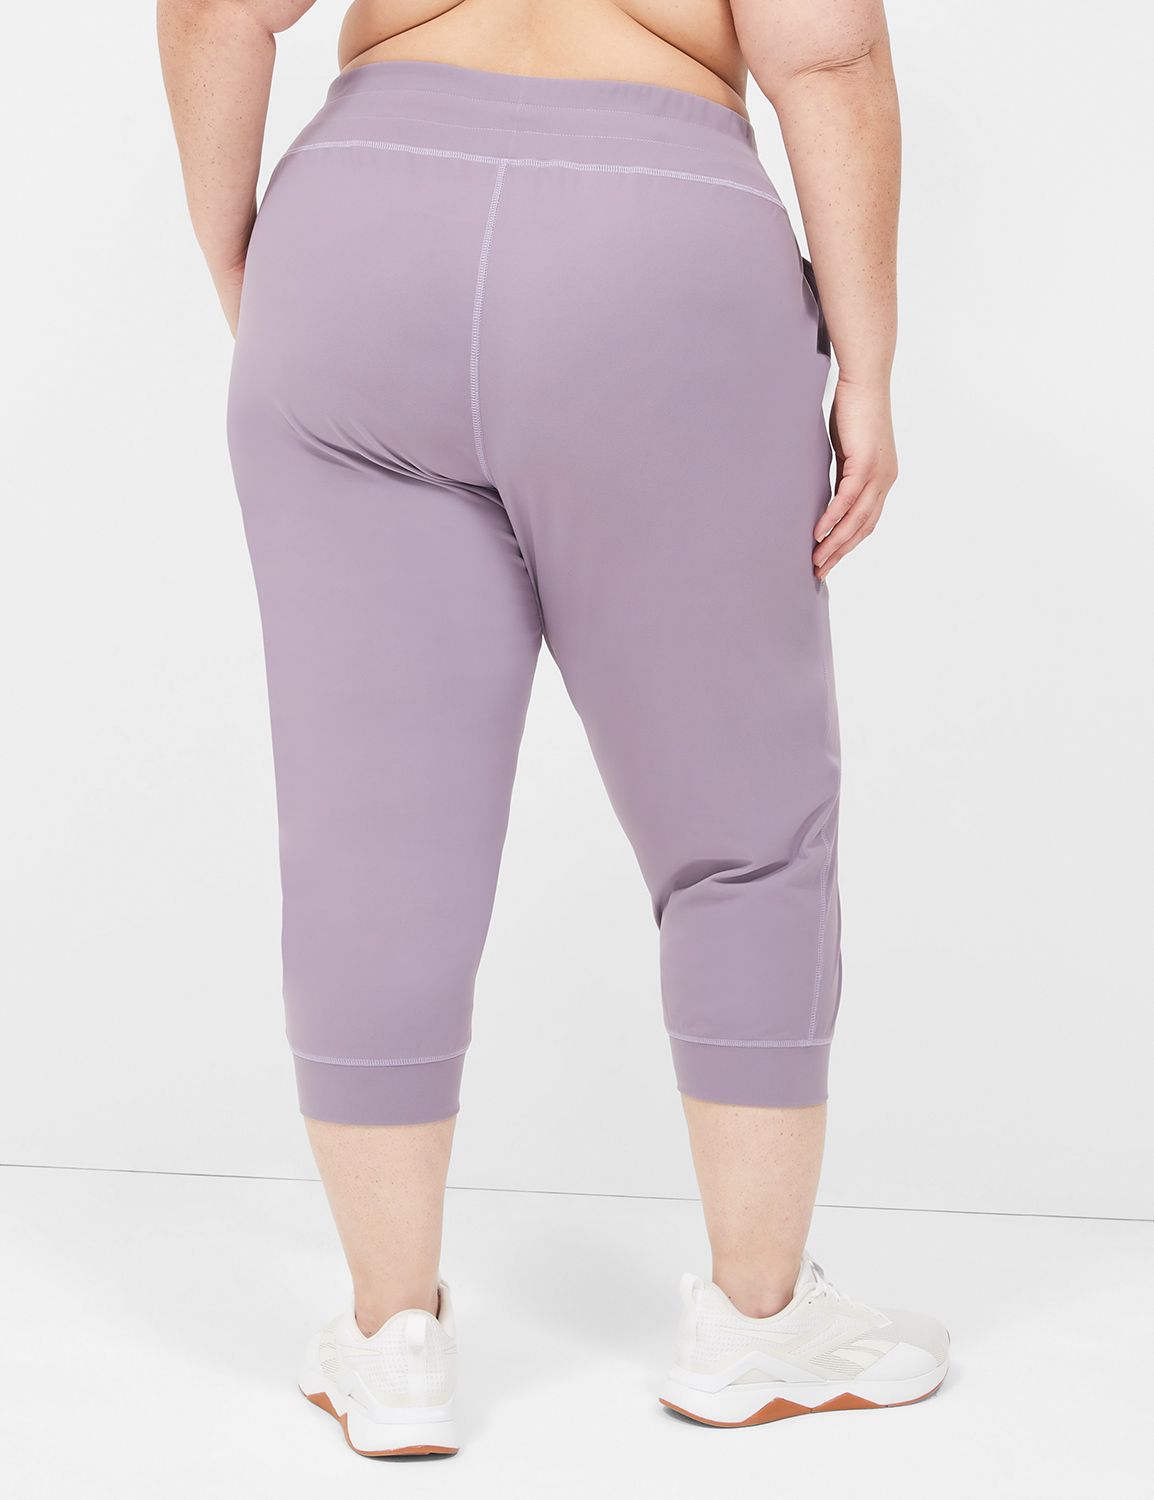 Lane Bryant - InStyle is sharing the LIVI love. Peek our LIVI